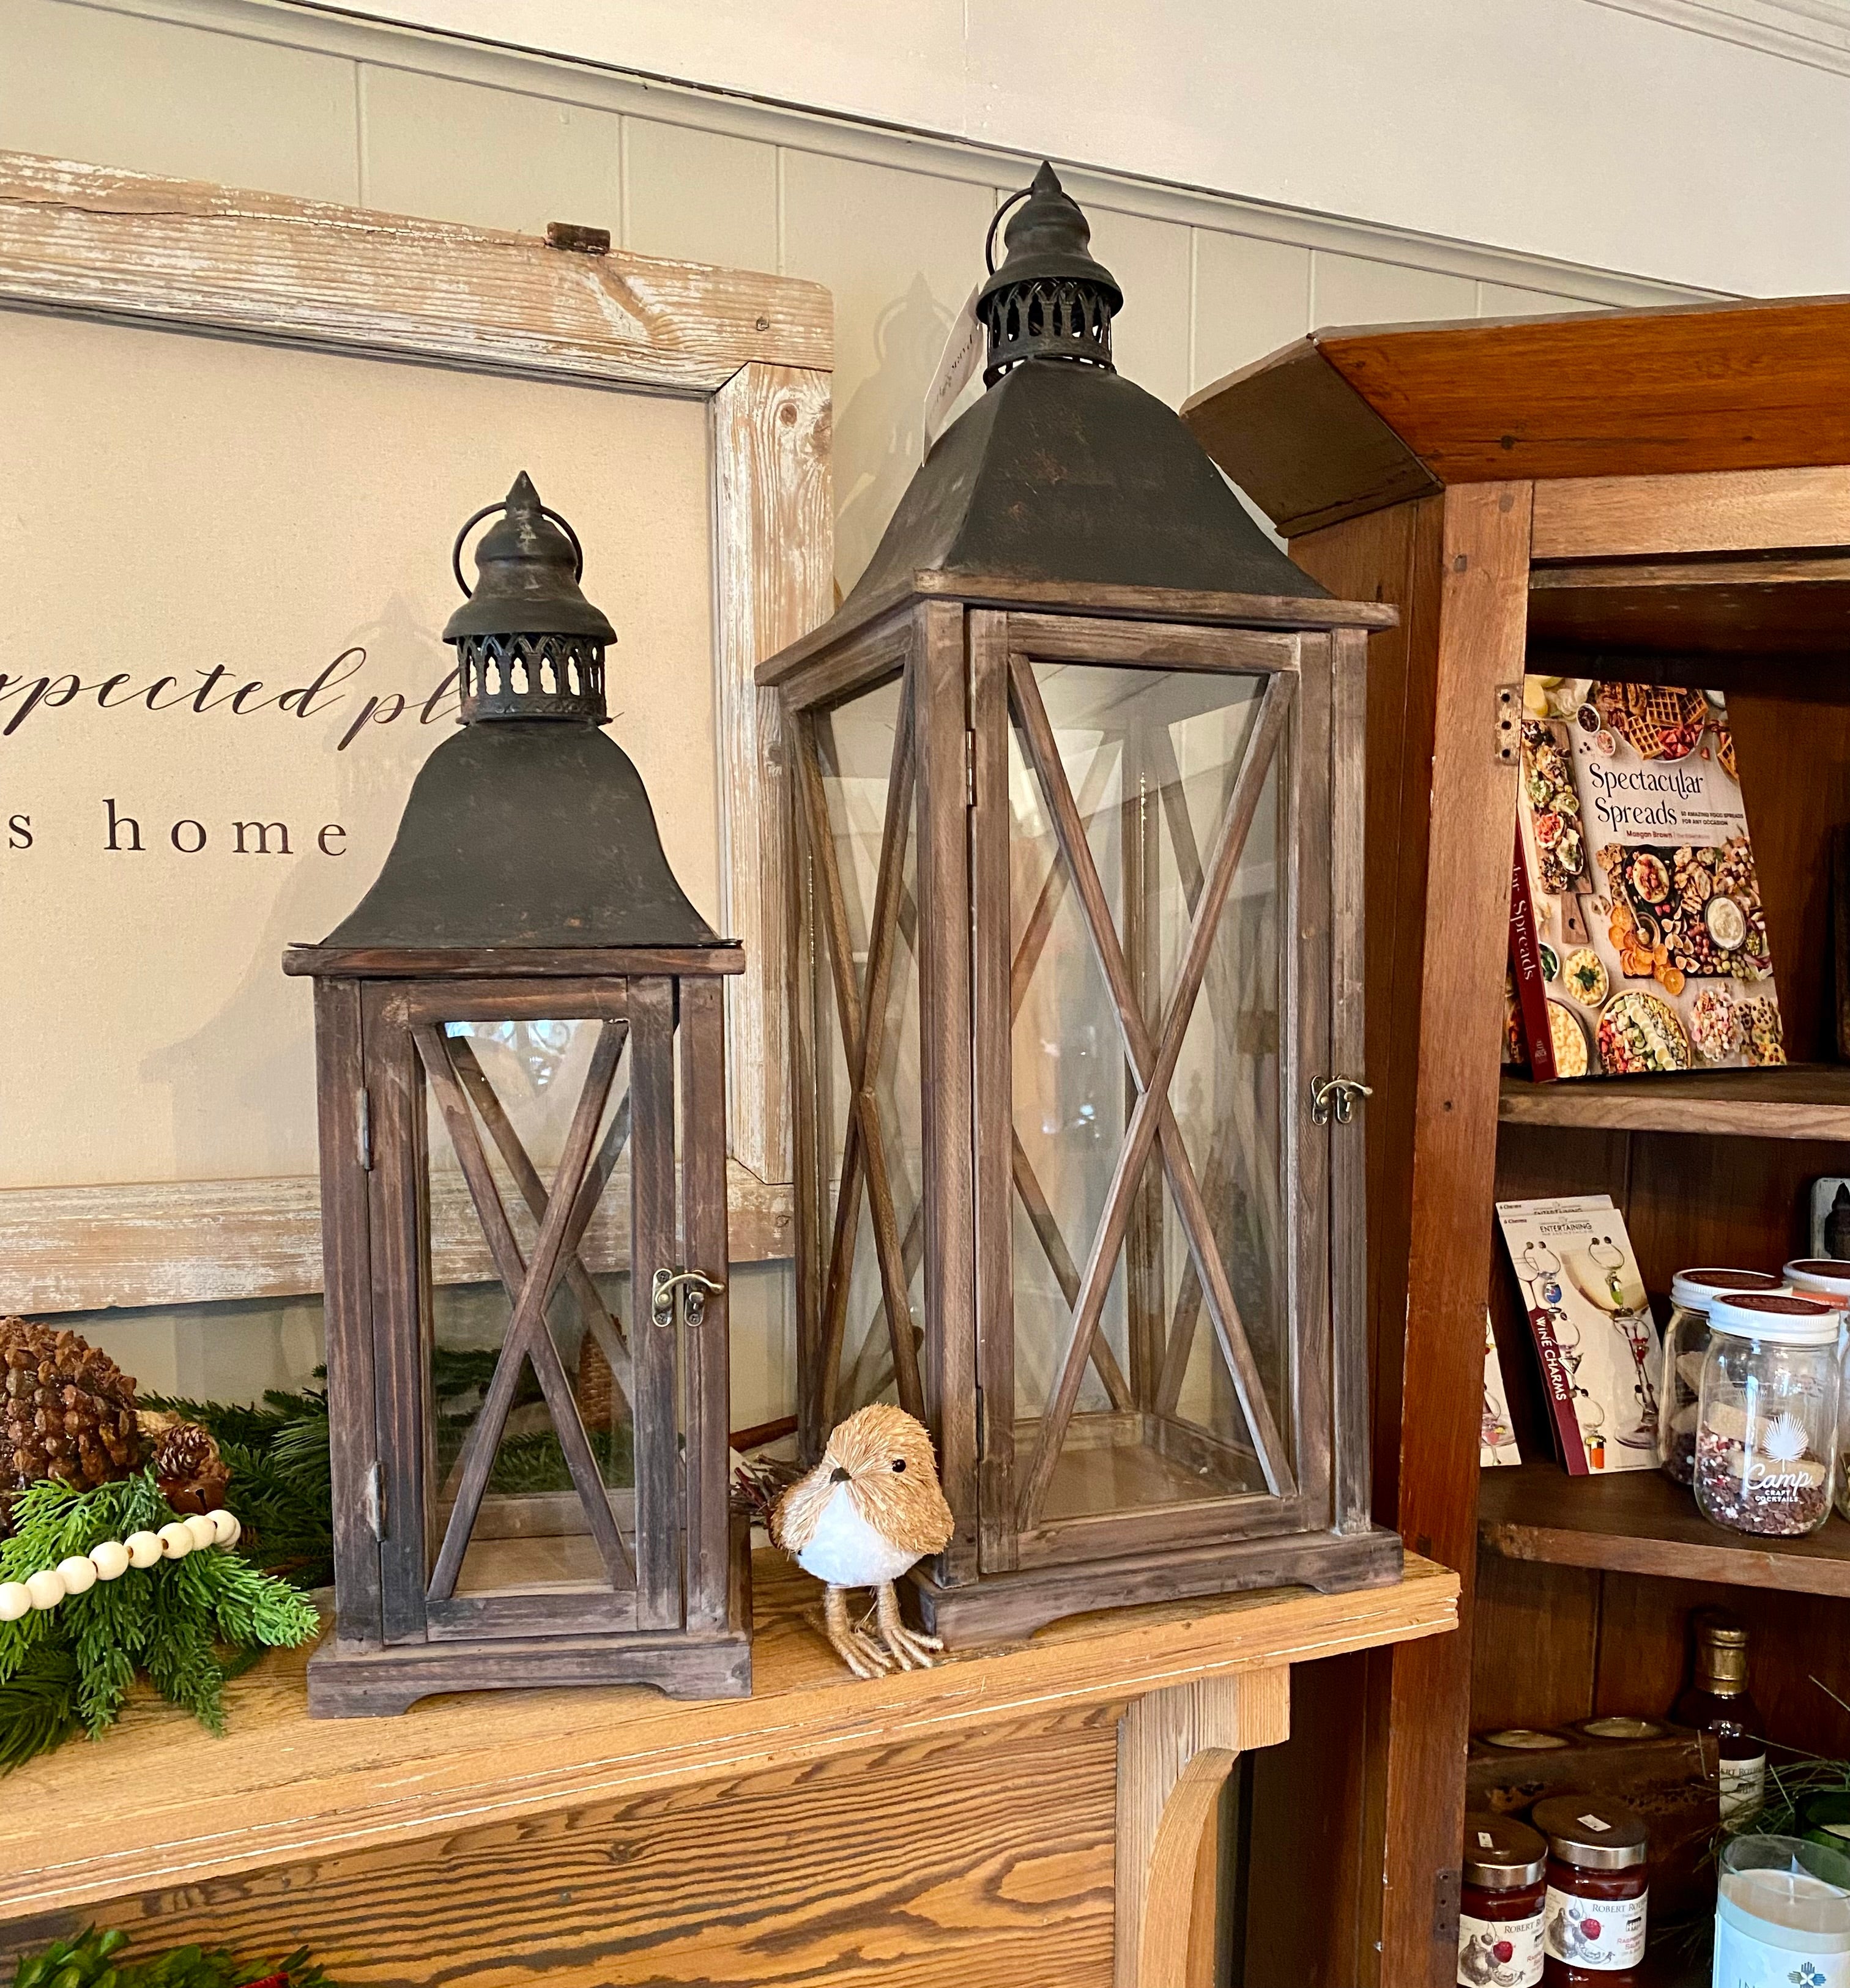 These are beautiful lanterns with aged coal finished metal tops and a wood stained and waxed frame. You will love how they enhance your décor!  Details:  Materials: Fir wood, iron and glass Small: 8" x 8" x 22" Large: 10.5" x 10.5" x 31" Each lantern sold separately Shipping: Please contact us for availability and shipping of the large lantern (because of the fragile nature of shipping this product). This product is not eligible for free shipping.